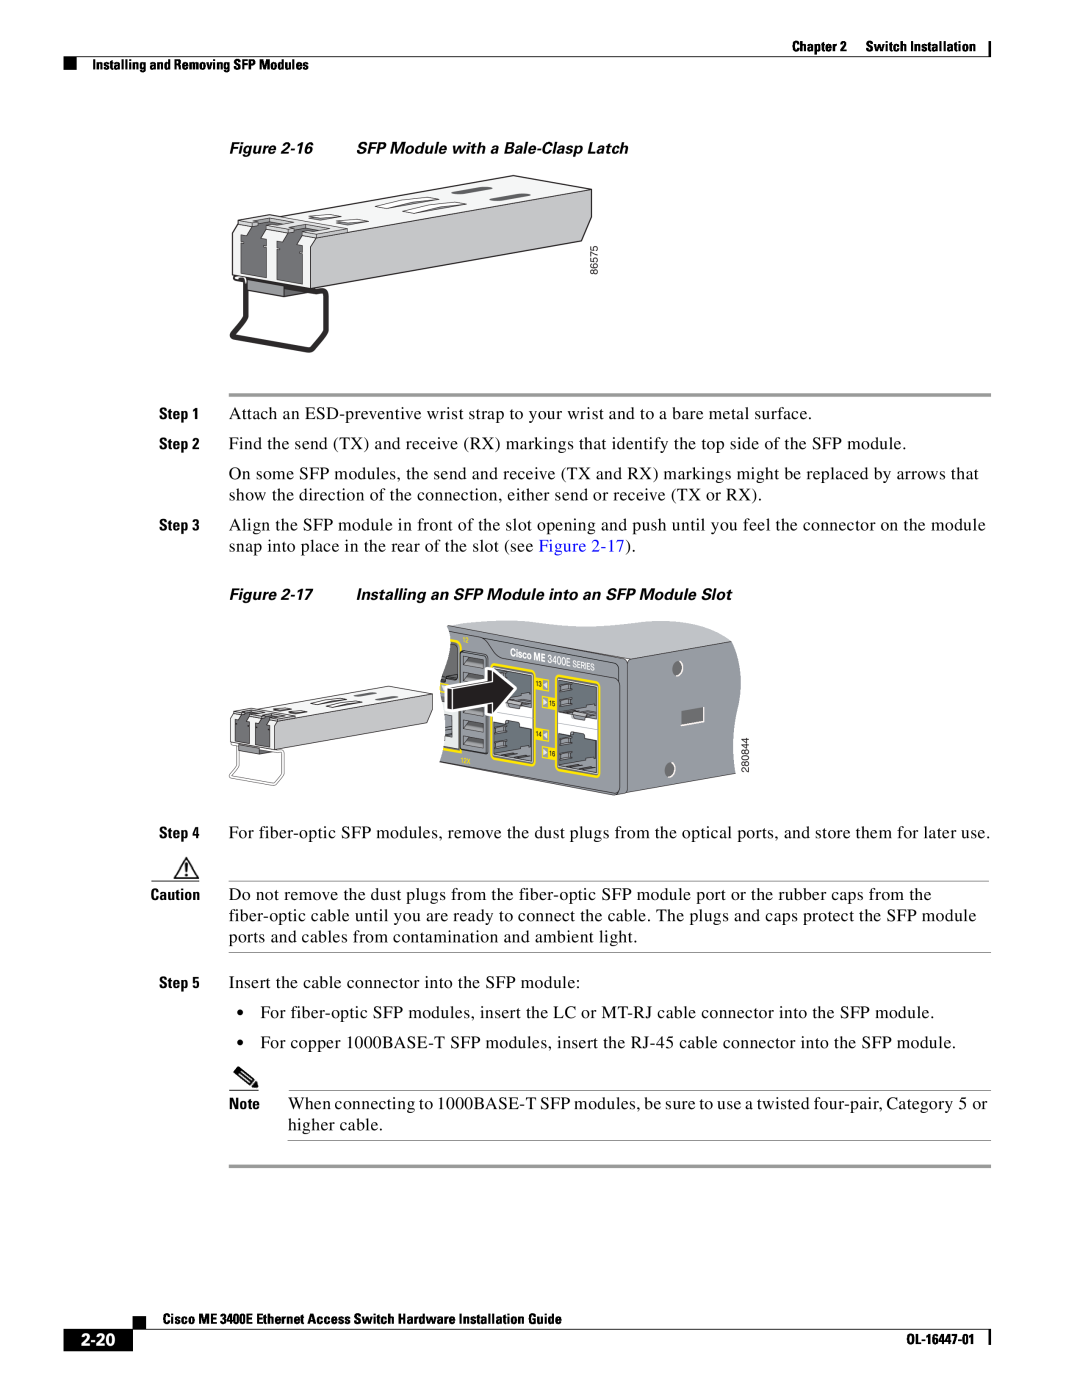 Cisco Systems OL-16447-01 manual 2-20, Insert the cable connector into the SFP module 